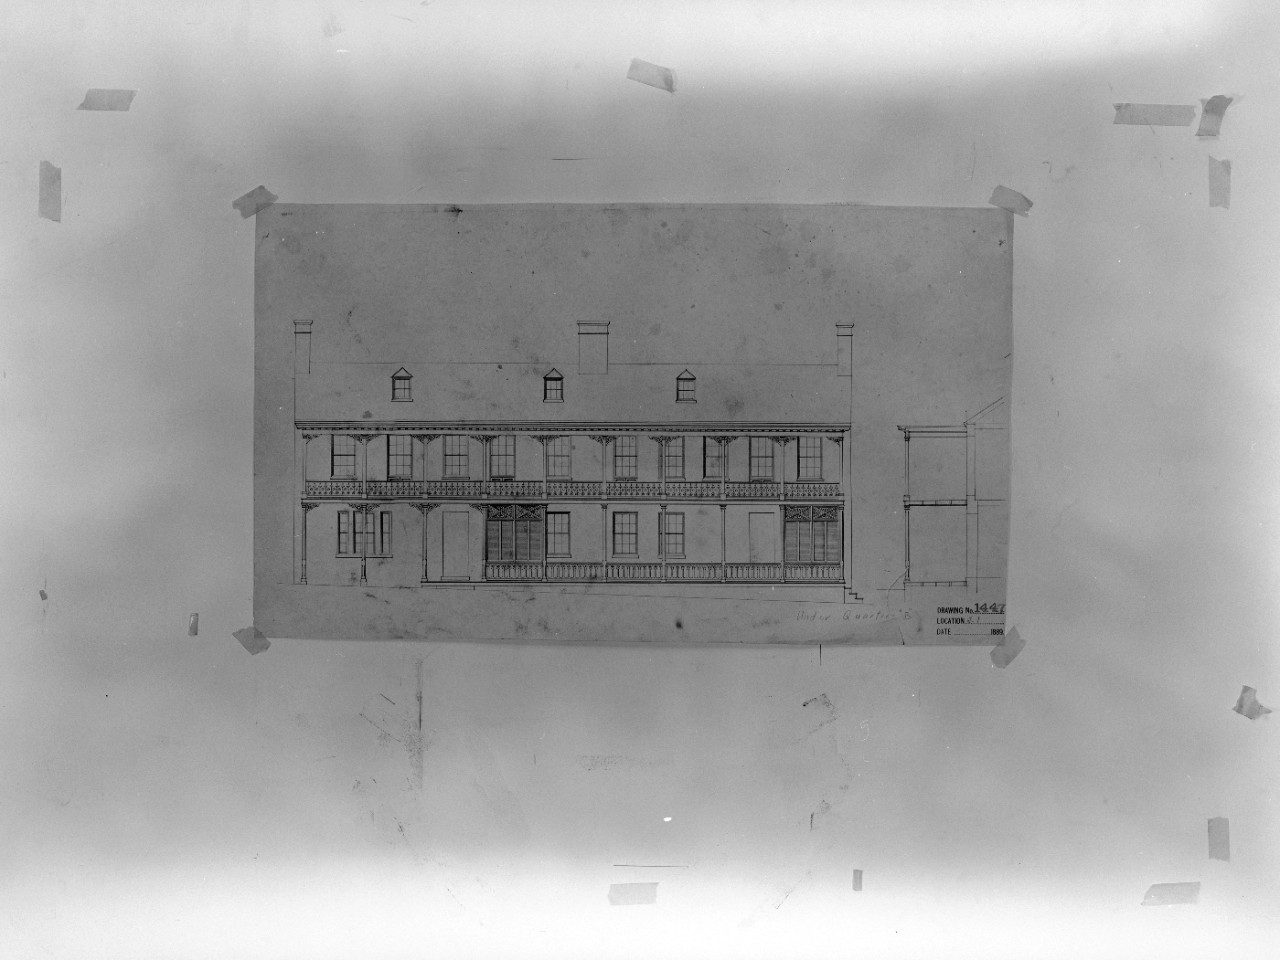 HABS-DC-WASH-74-B-4:   Photocopy of original drawing on file of Quarters B, Washington Navy Yard.   This plan is located at Naval Station Public Works Department, Washington Navy Yard, Washington, D.C.   Historic American Buildings Survey.   Courtesy of the Library of Congress.  